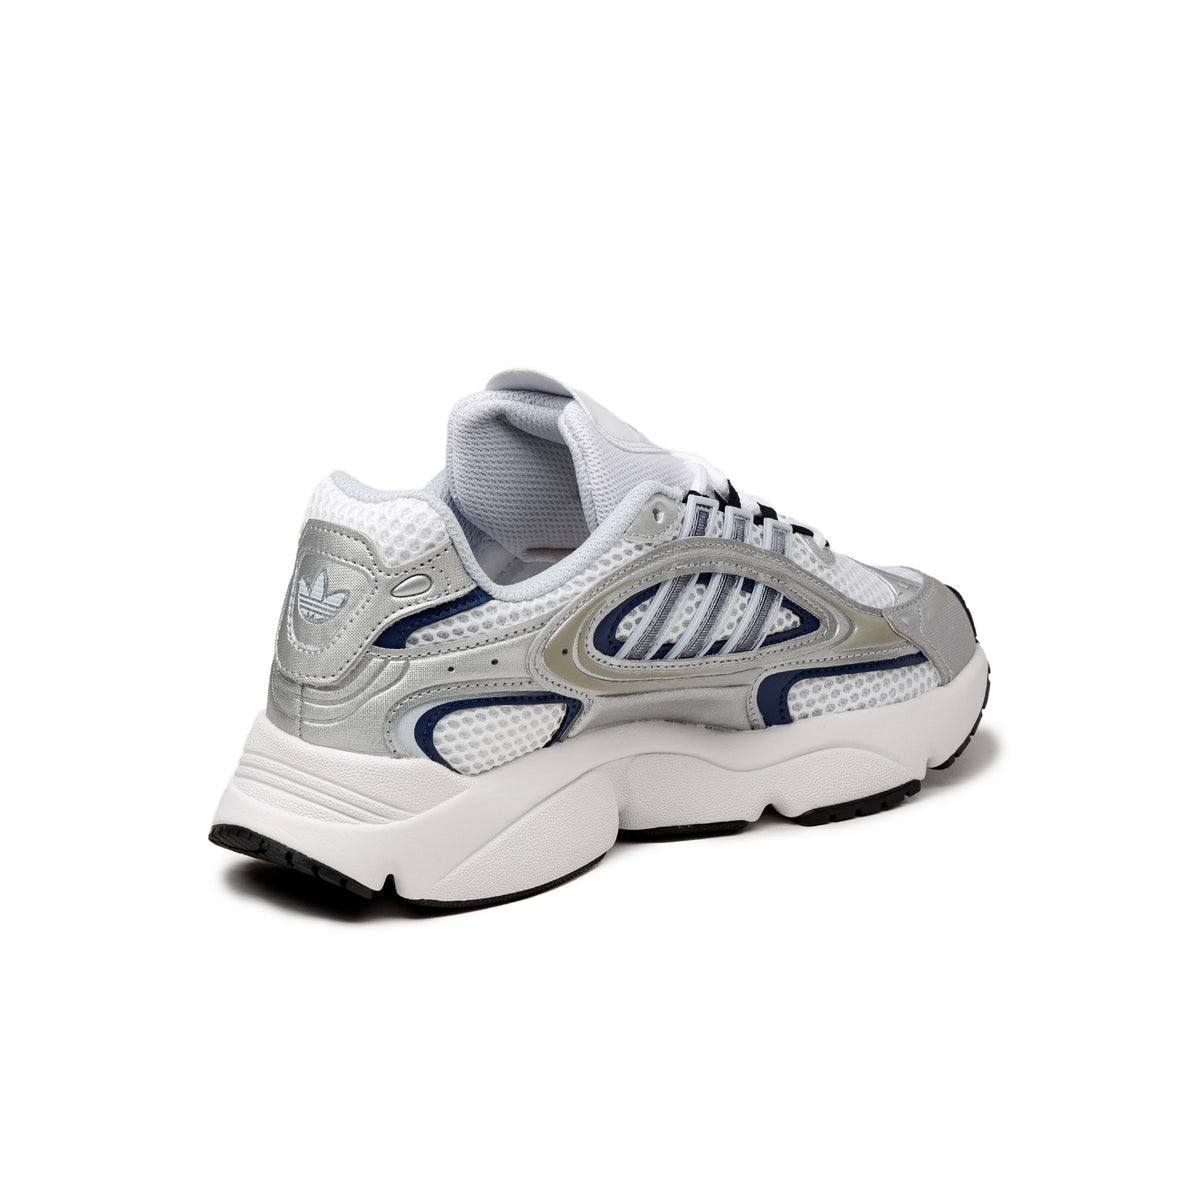 Adidas Ozmillen W – buy now at Asphaltgold Online Store!